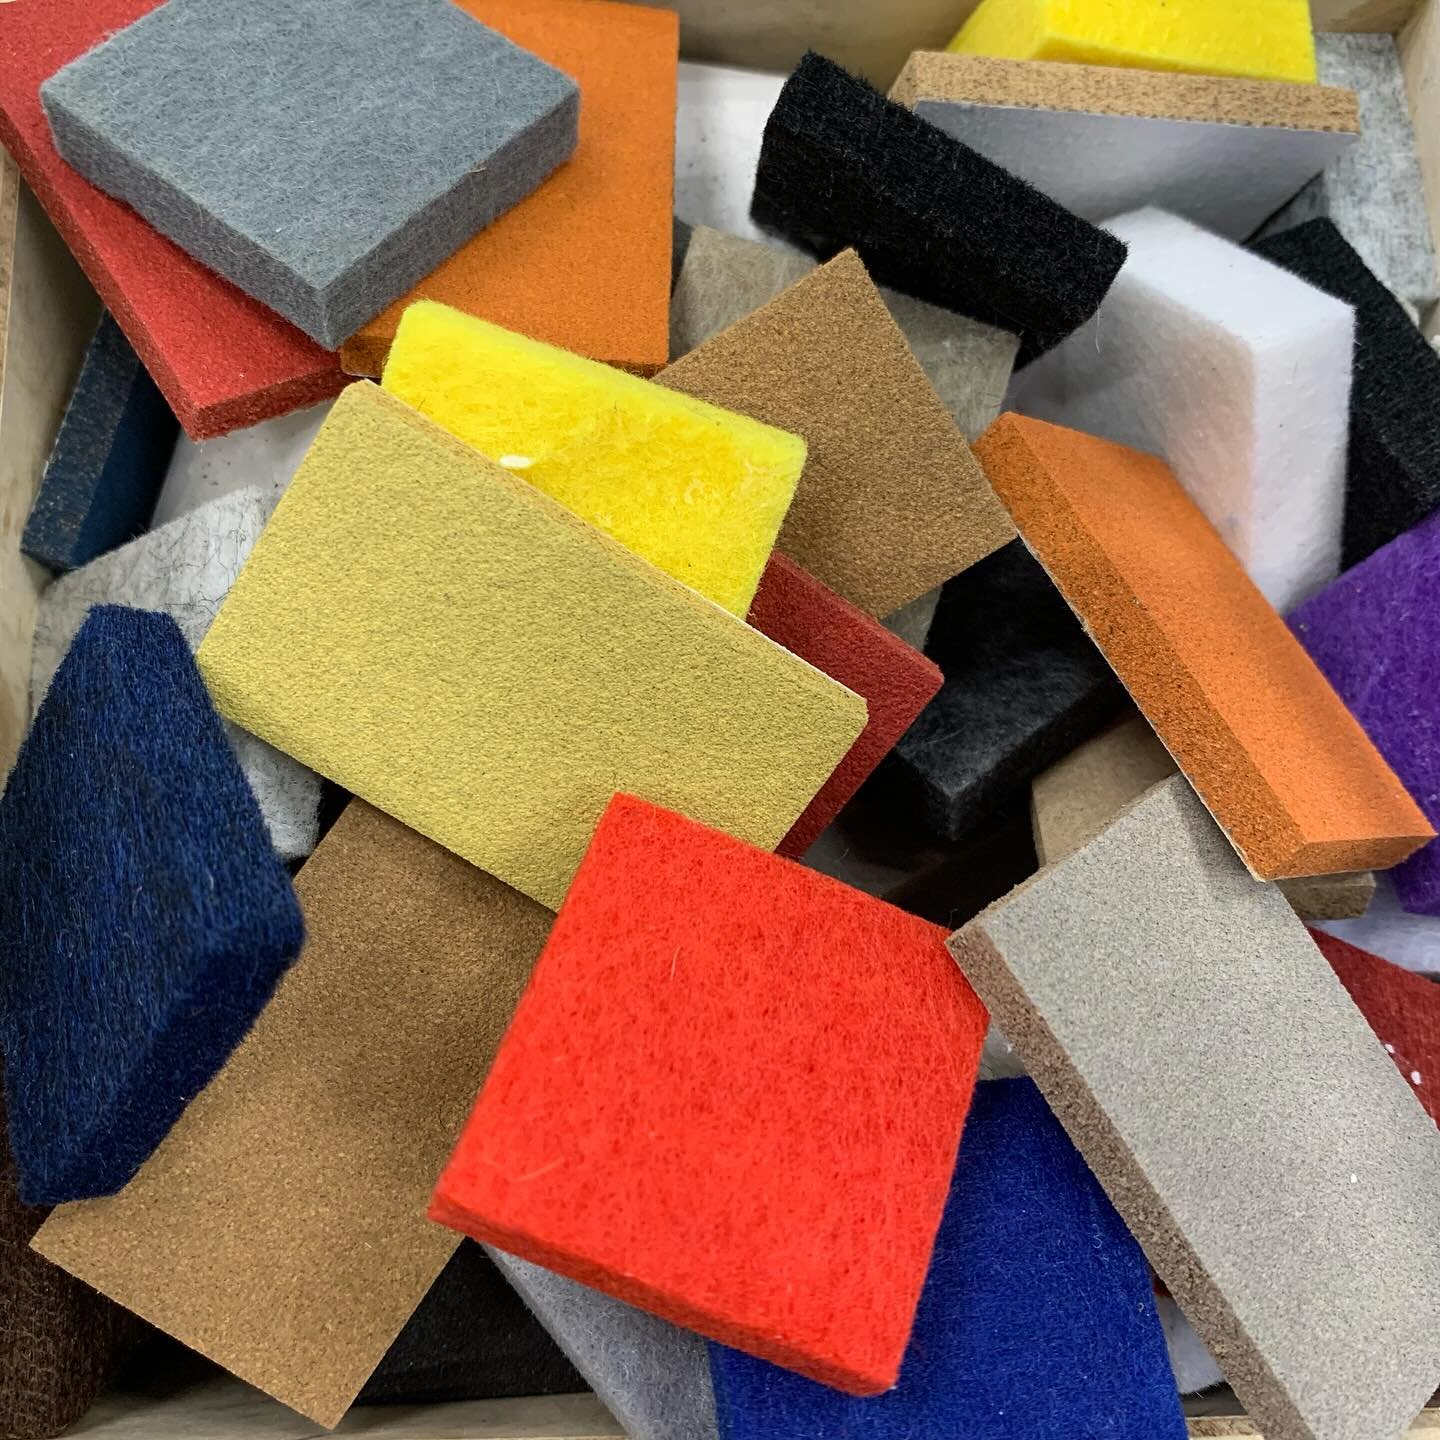 Open Studio is on this Friday May 3 and Saturday May 4 at the following times:

2:00-4:30
or 5-7 pm

This weekend we are making tile collages with an amazing array of archtectural samples donated from @architecture49. So many colours and textures to 